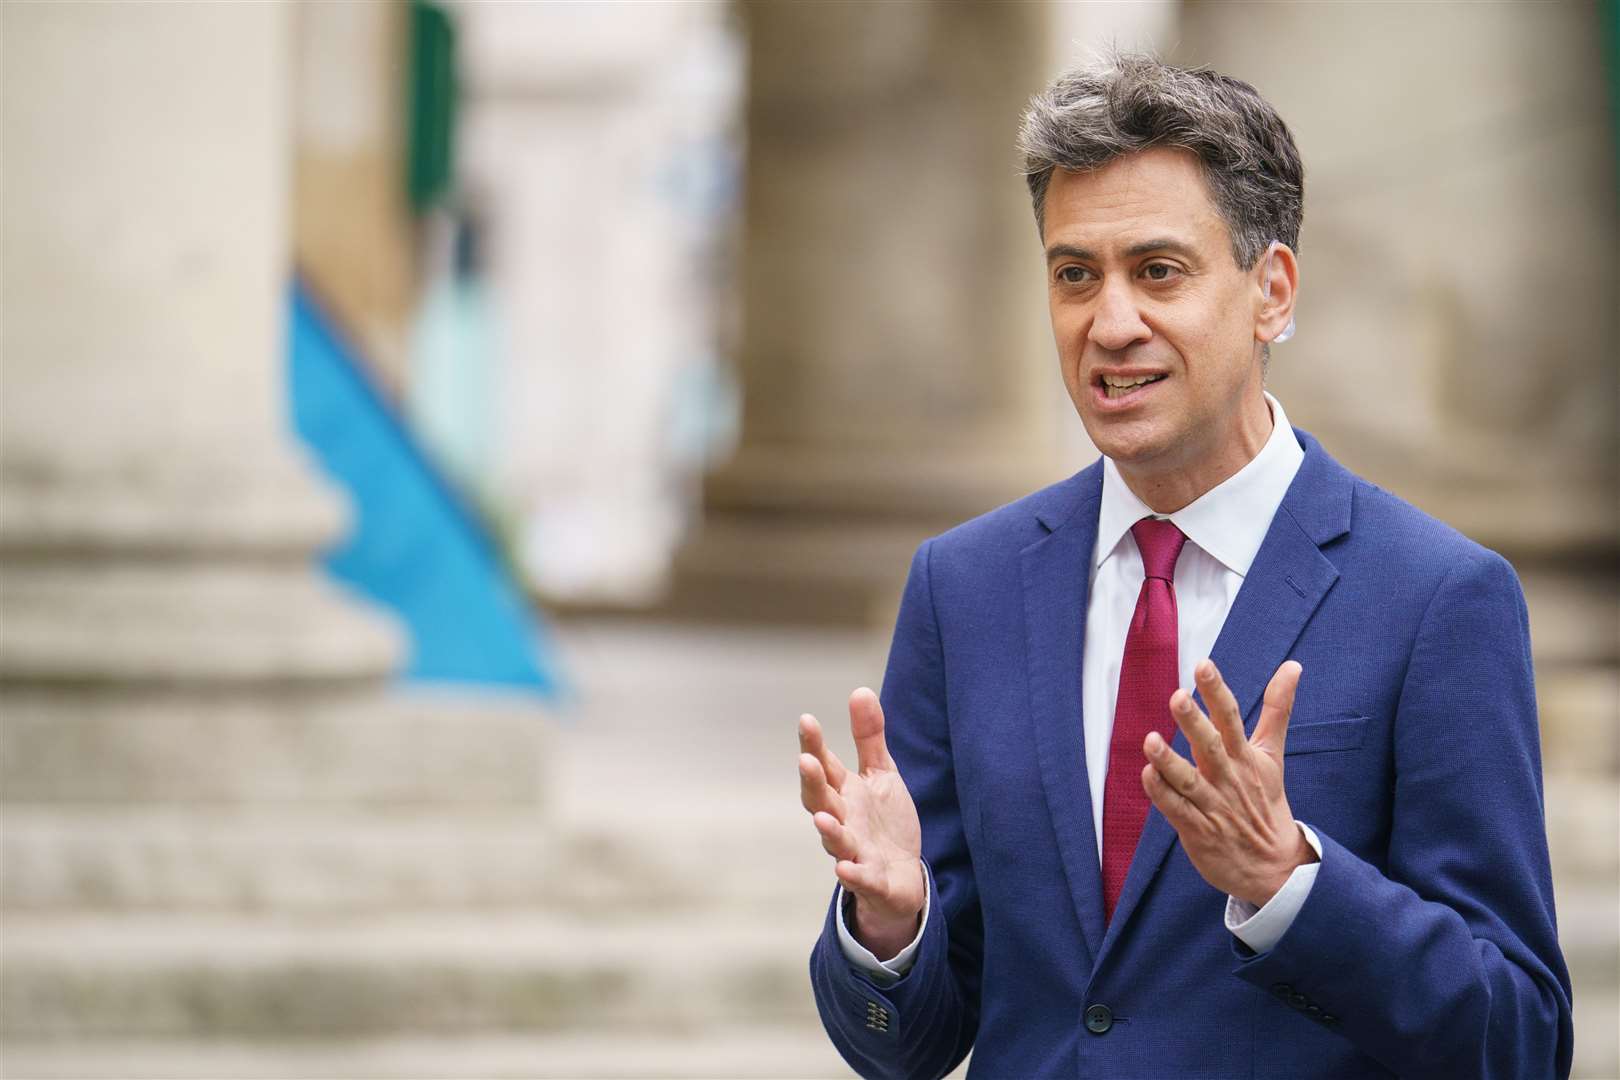 Shadow climate change secretary Ed Miliband described onshore wind as a ‘vital tool’ in tackling climate change (Dominic Lipinski/PA)